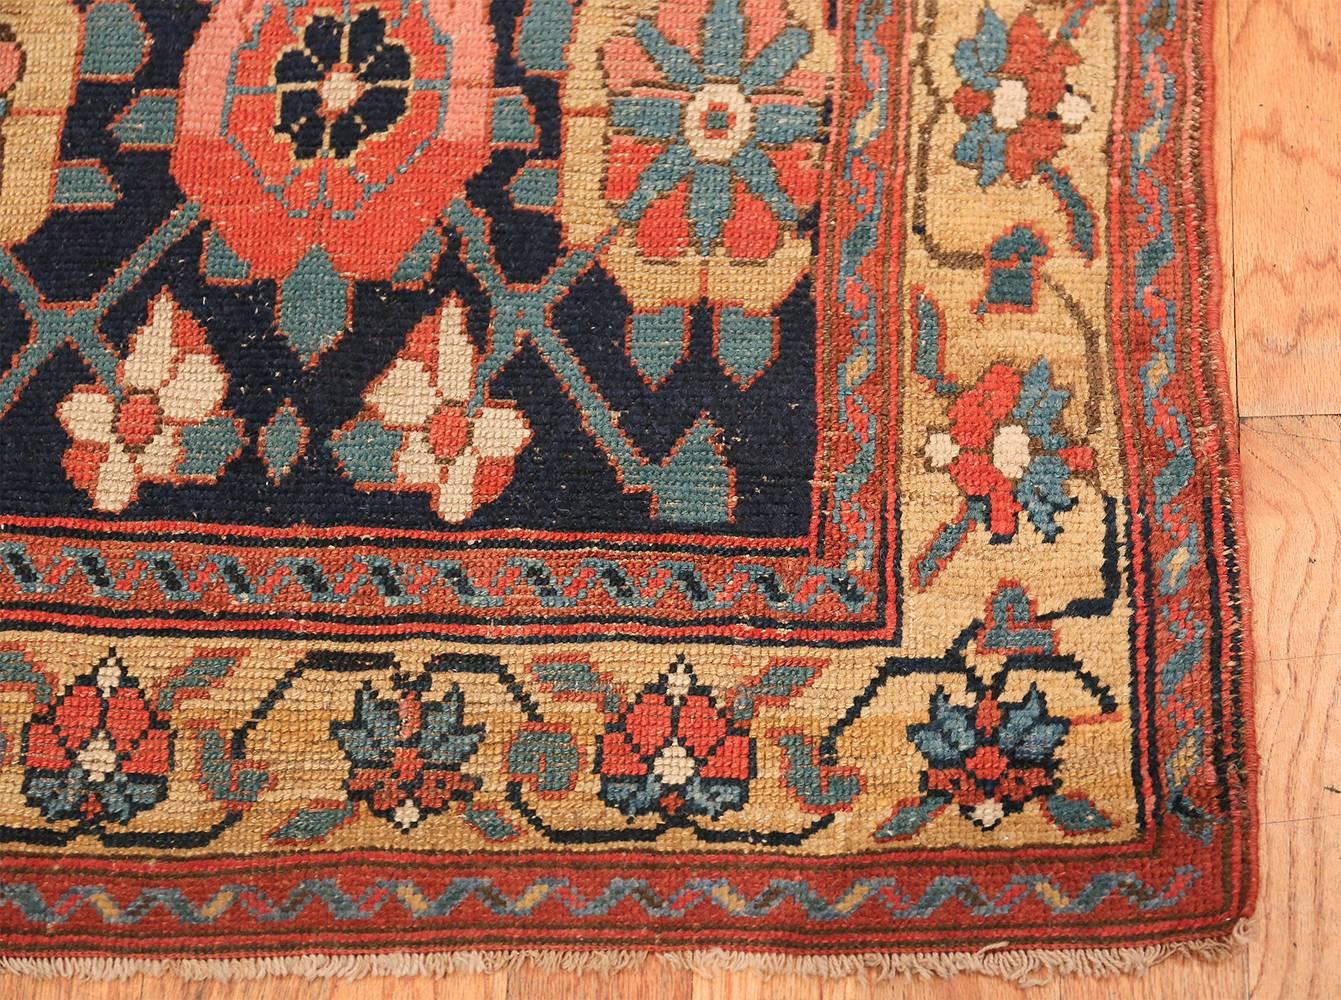 Hand-Knotted Early 19th Century Tribal Persian Northwest Runner Rug. Size: 2 ft 10 in x 19 ft